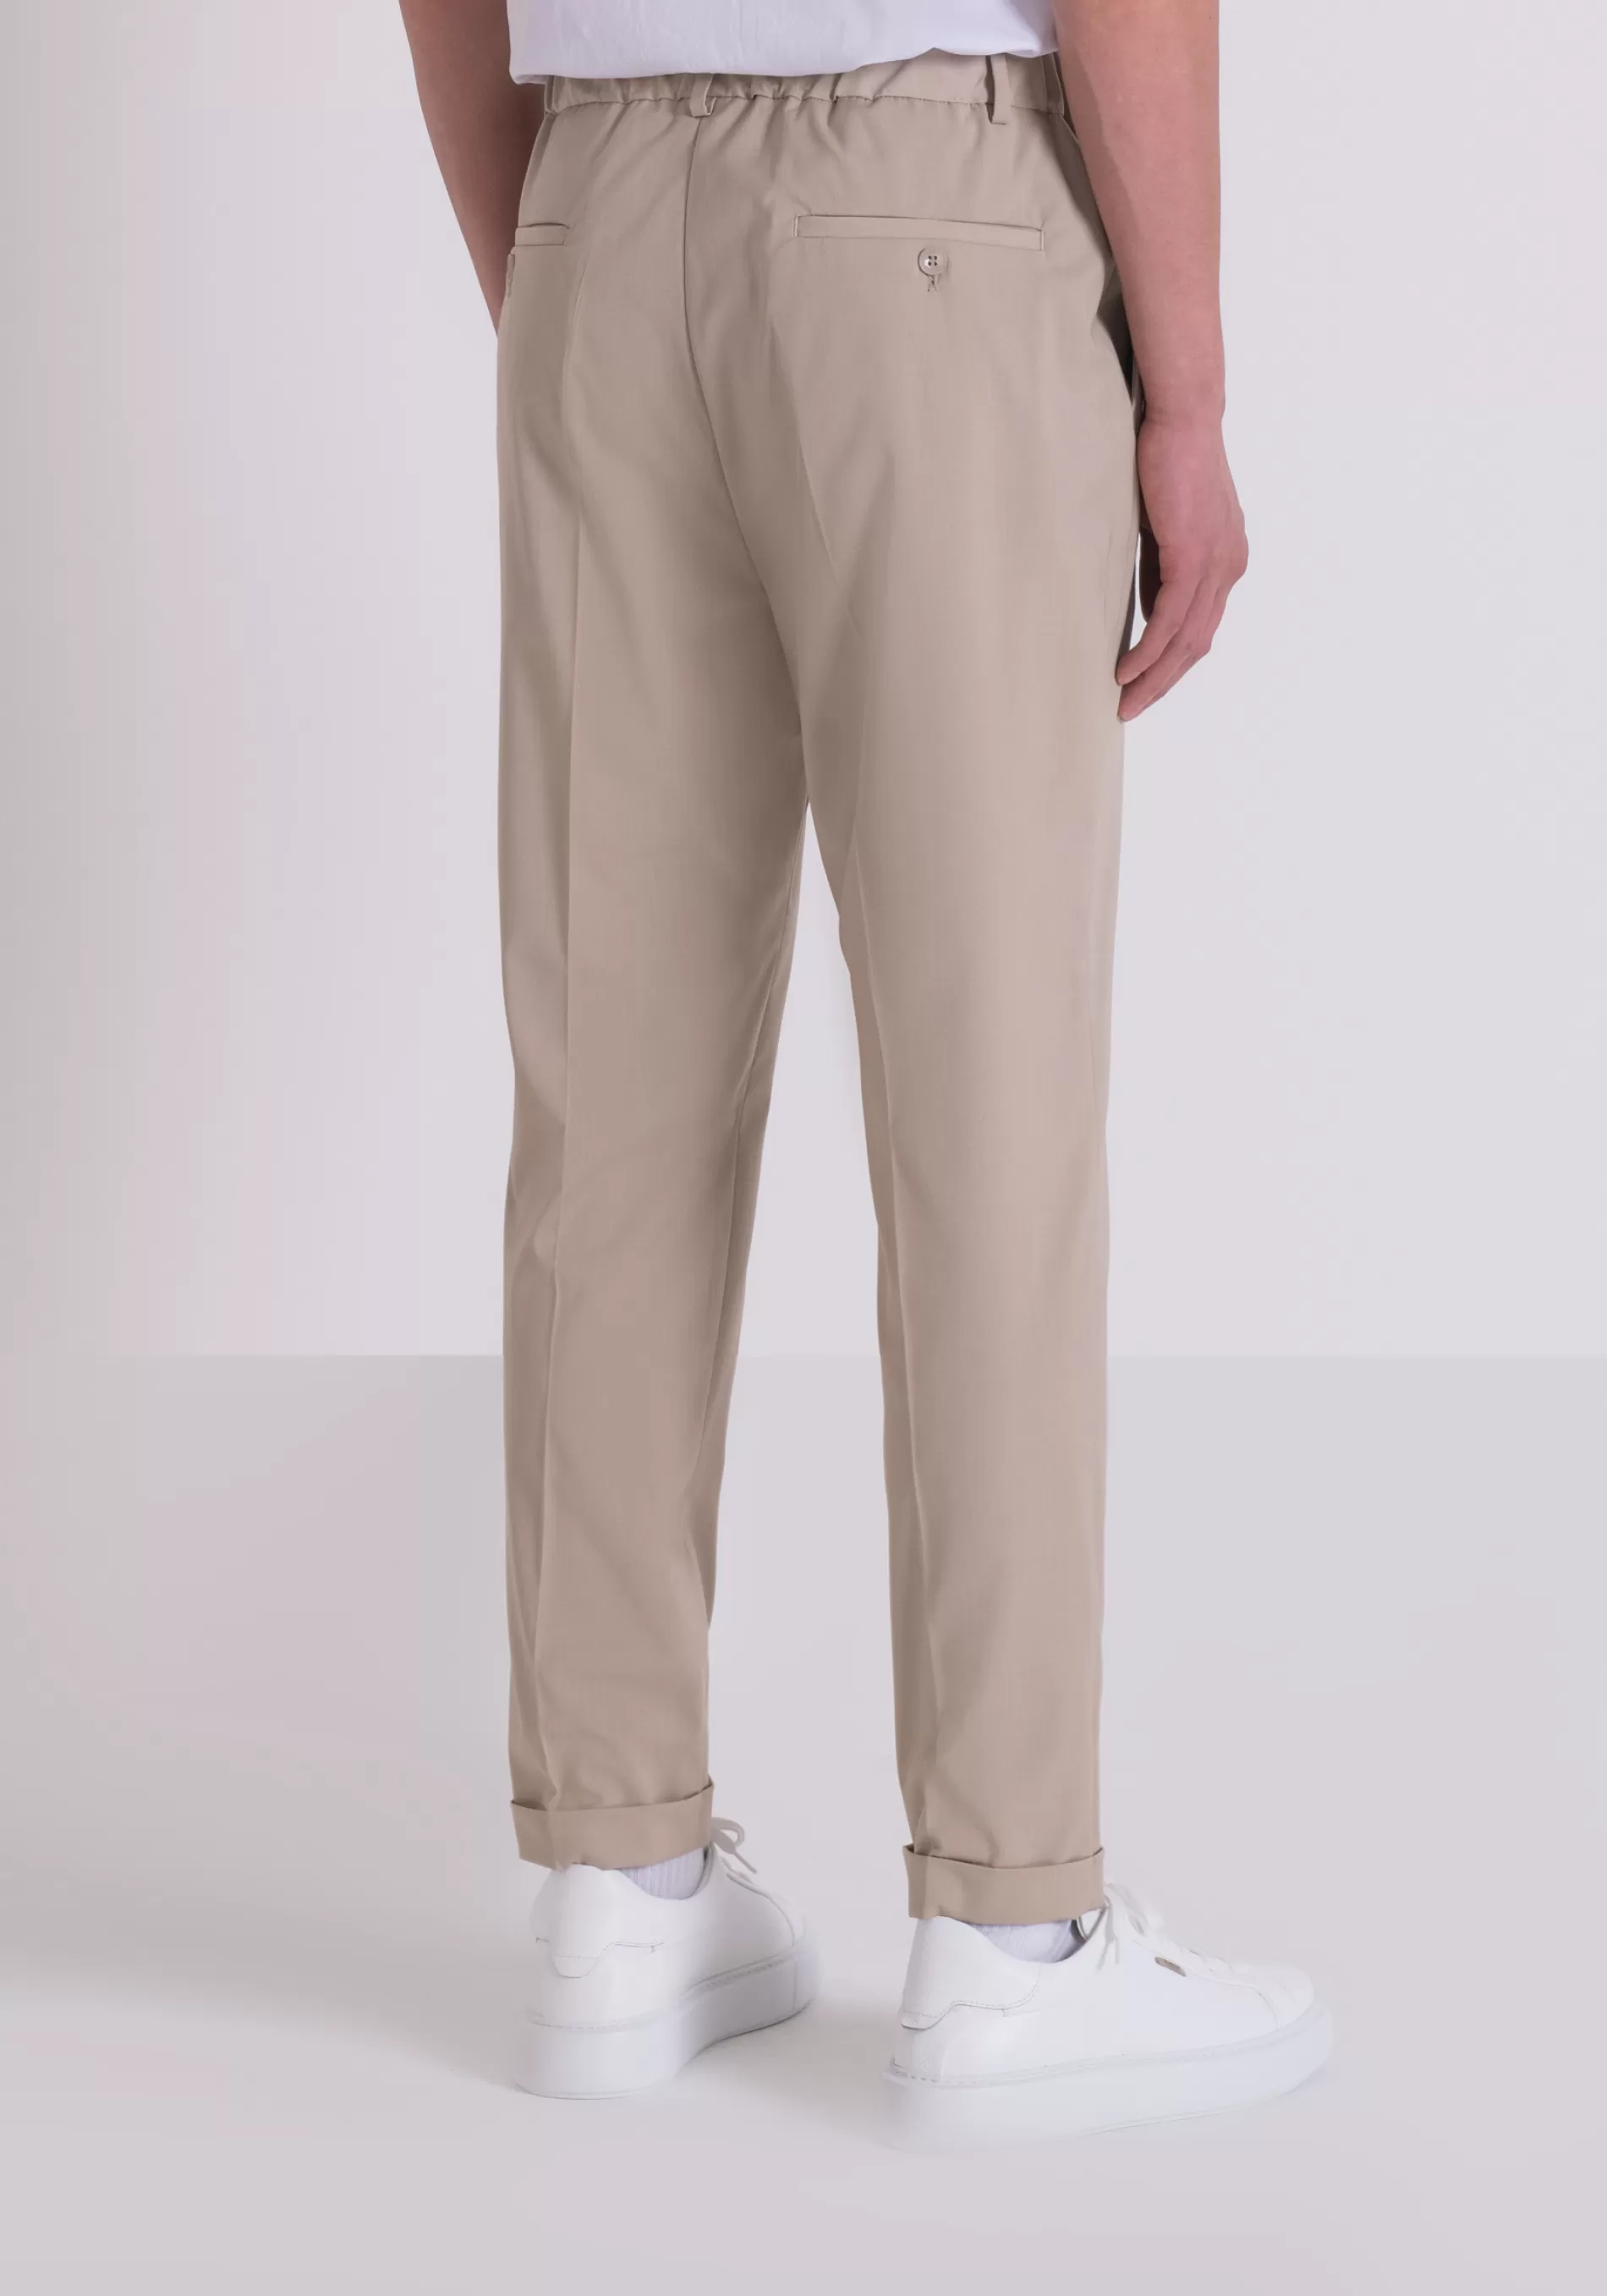 Best Sale JACOB REGULAR FIT TROUSERS IN ELASTIC VISCOSE BLEND FABRIC Trousers